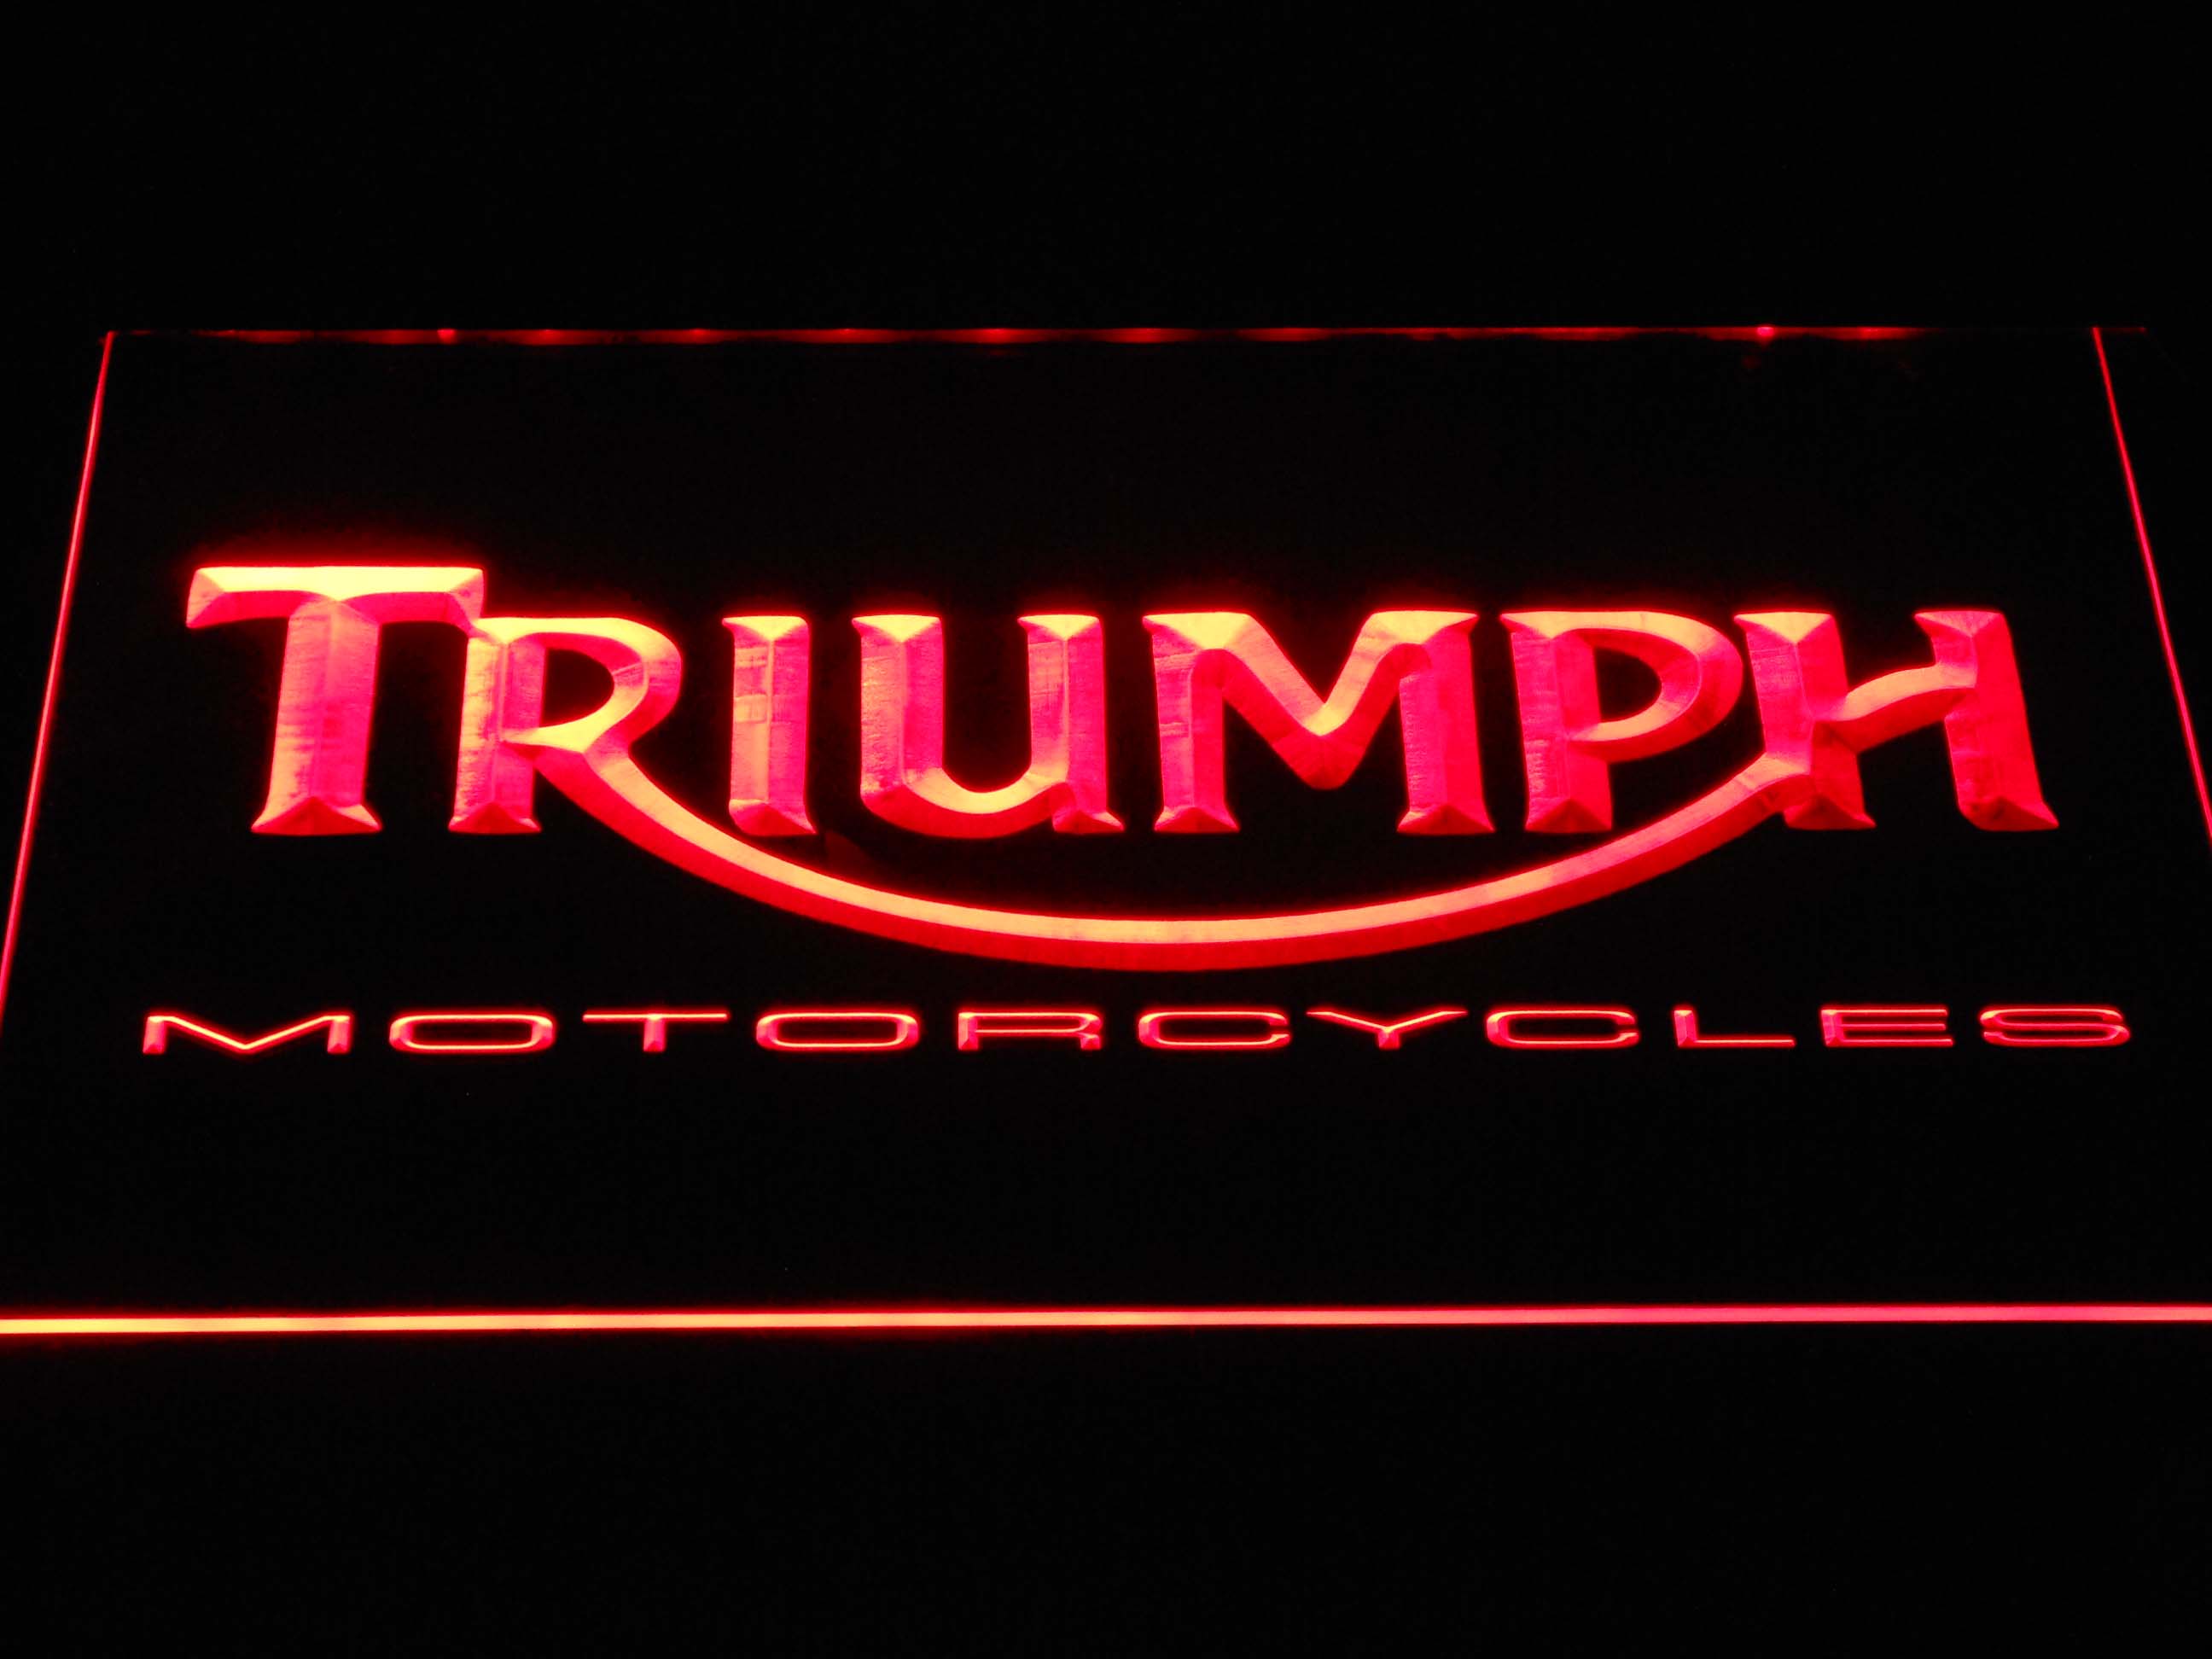 Triumph go your own way LED neon sign for Game Room,Office,Bar,7 Color US Seller 